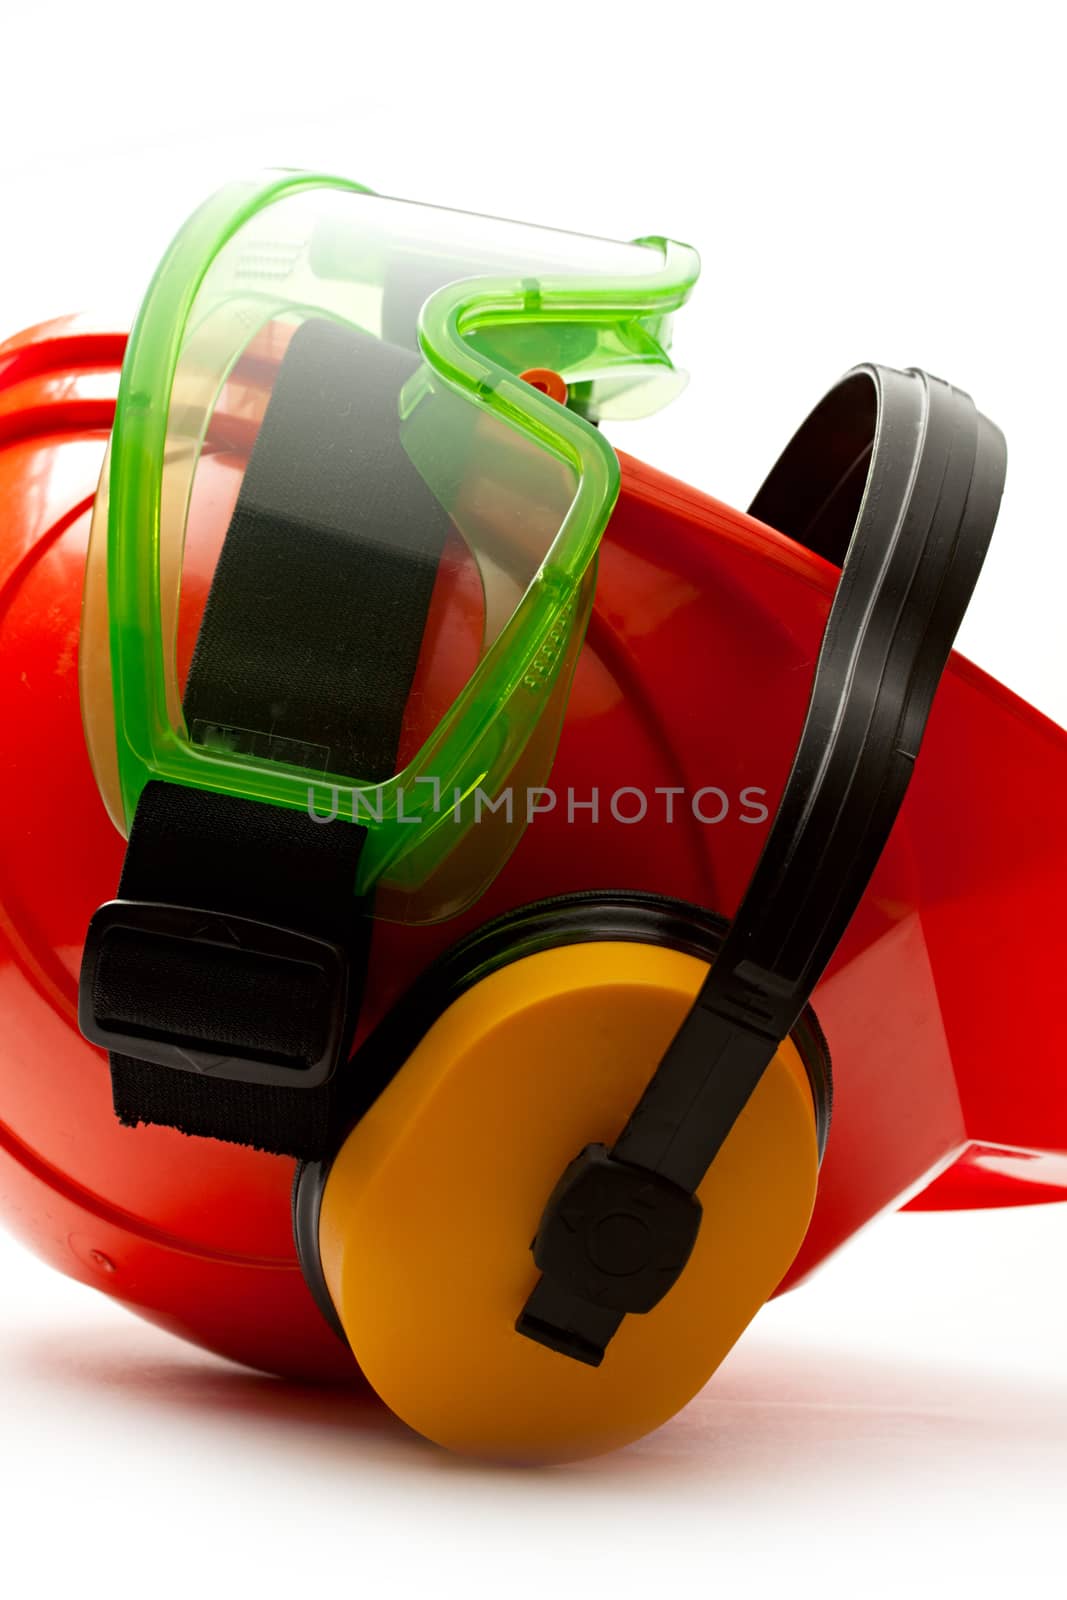 Red safety helmet with earphones and goggles by Garsya